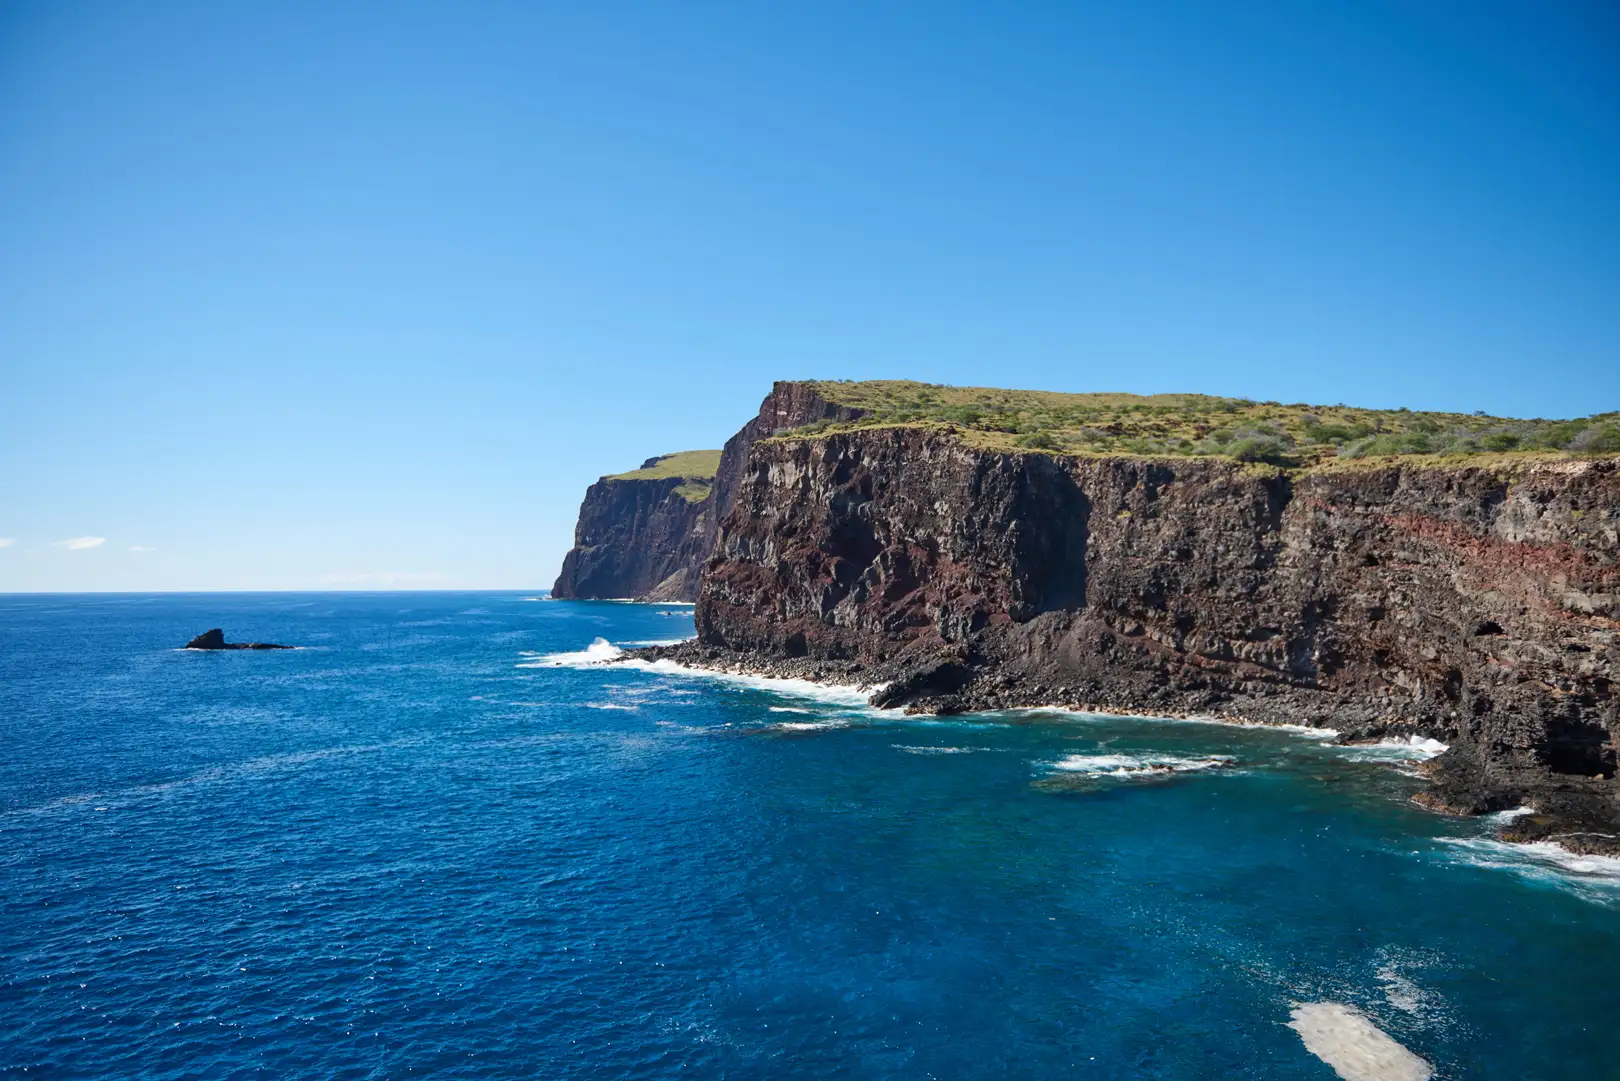 Photo of lanai island of Hawaii, water and cliffs, bright blue sky